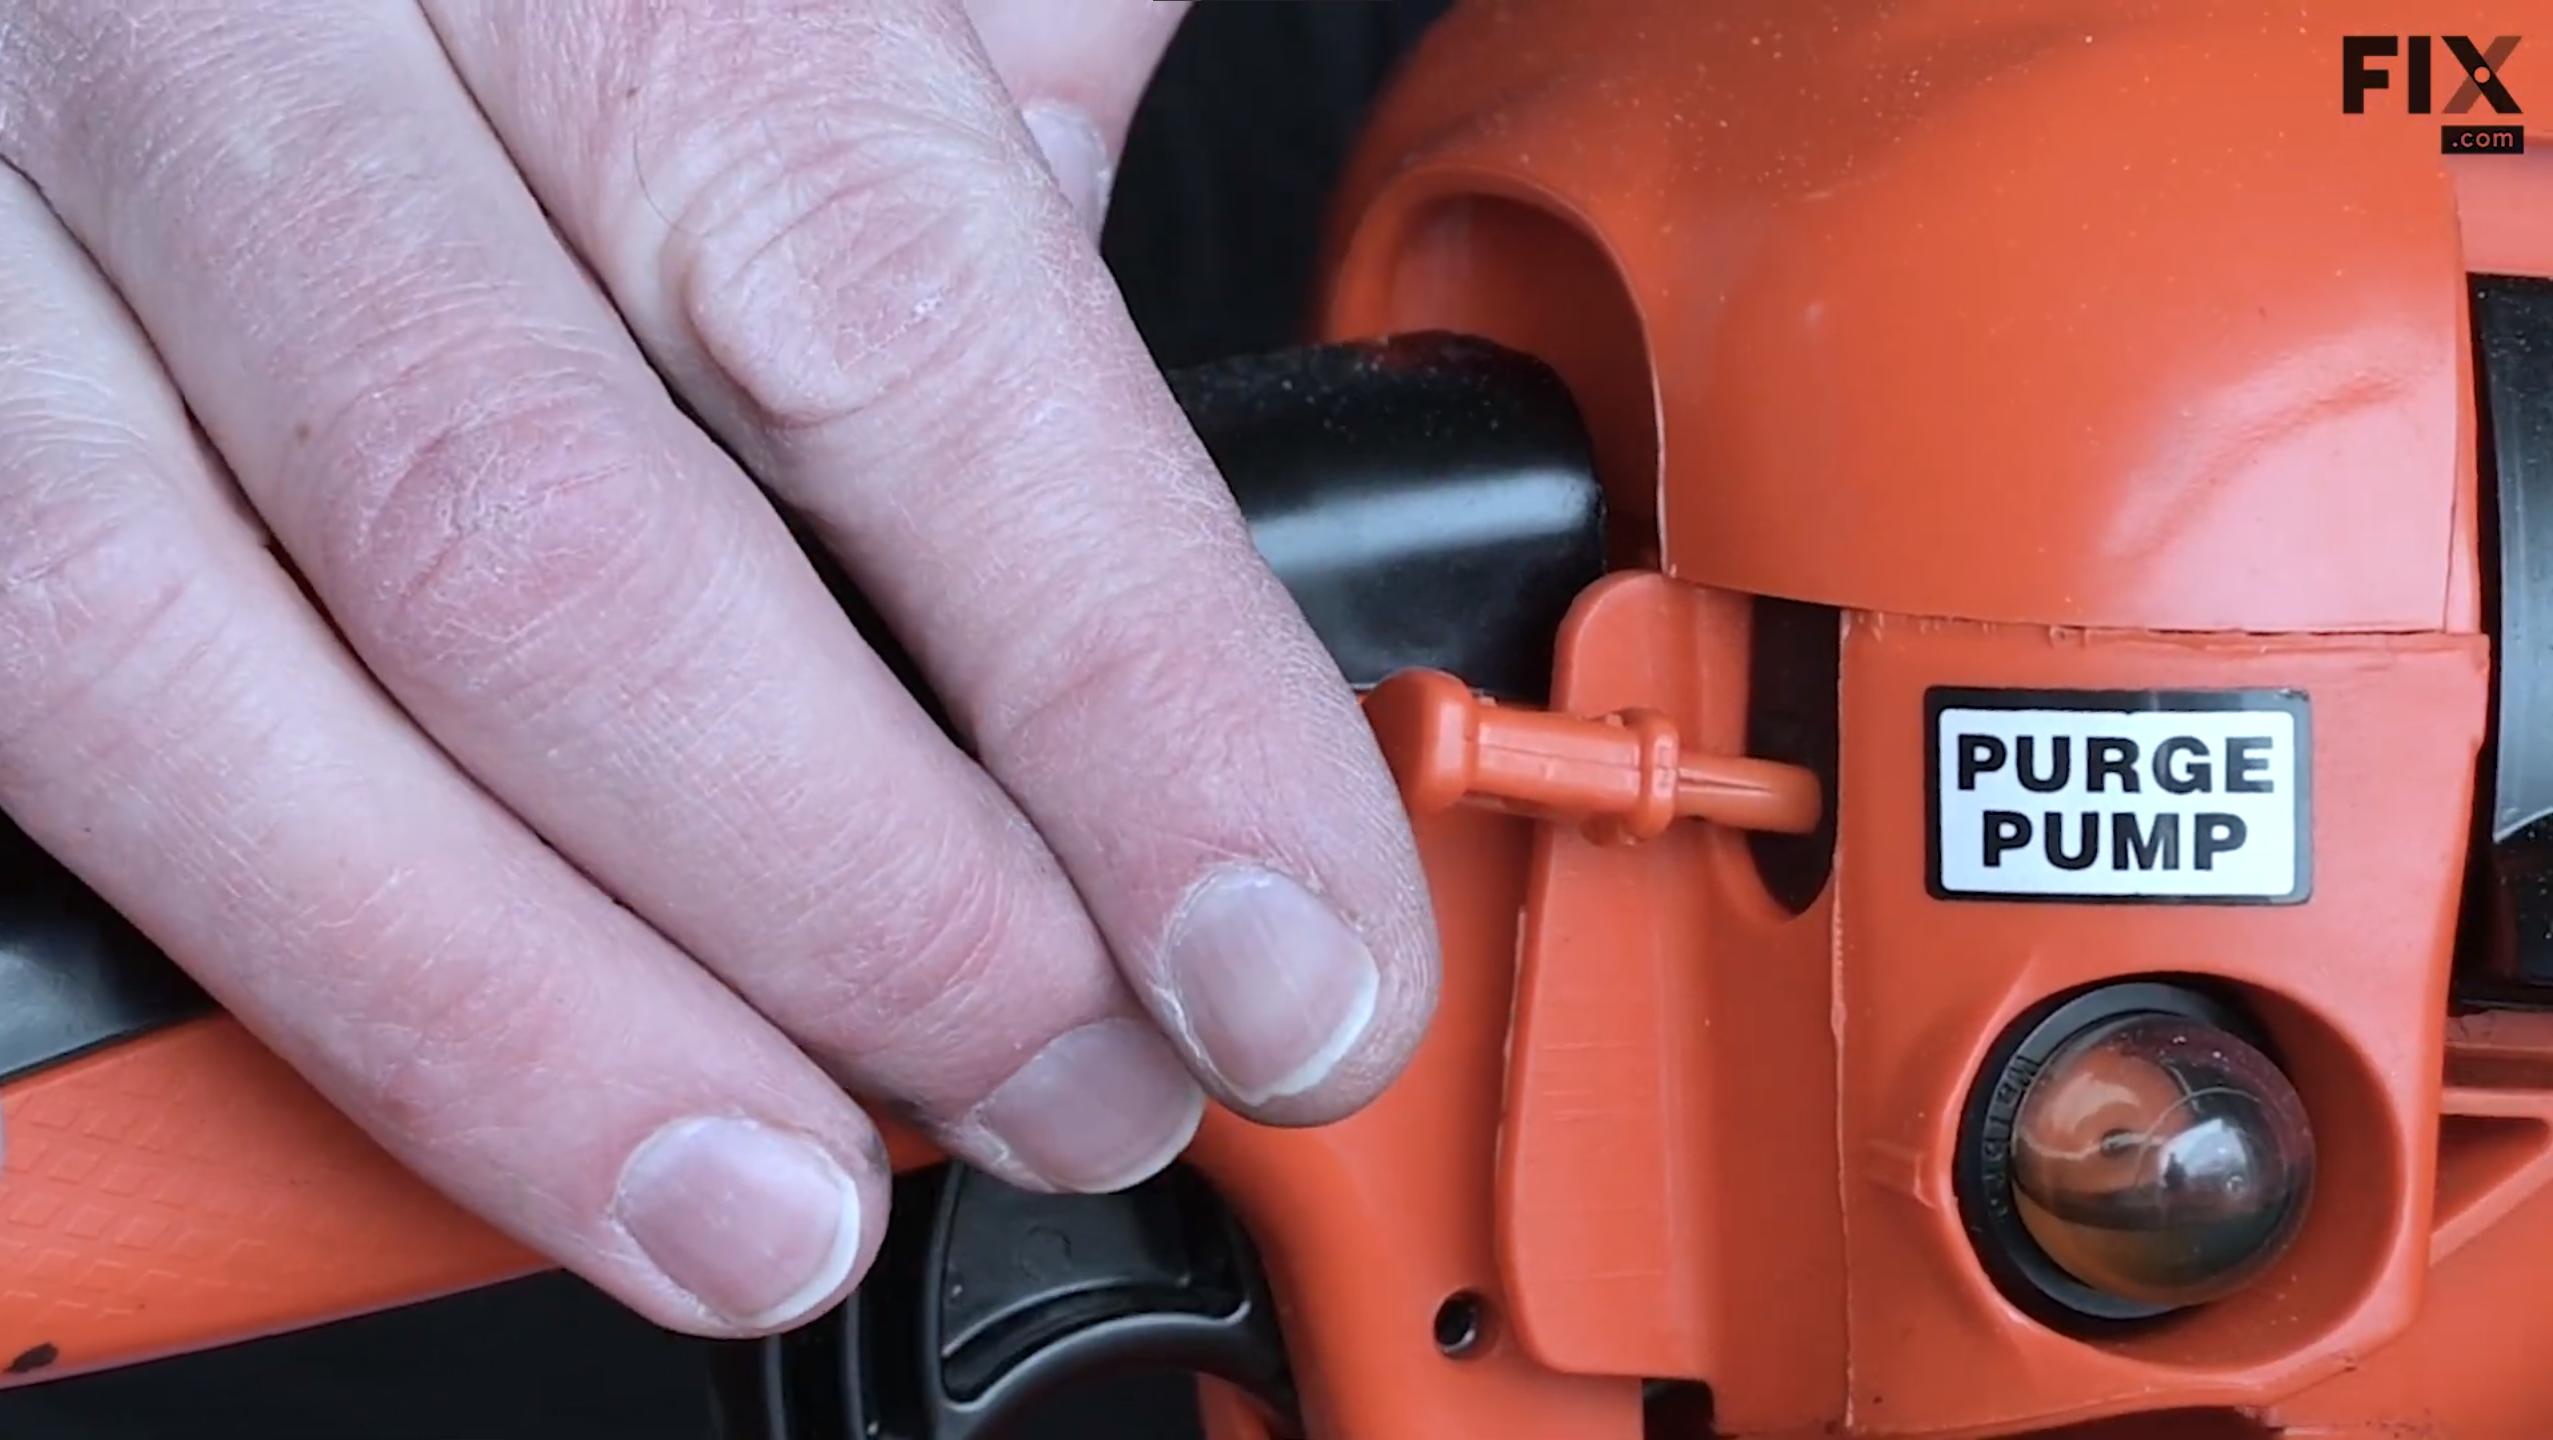 Make sure that you open the choke after initially starting the chainsaw, to allow more air into the engine when it starts.